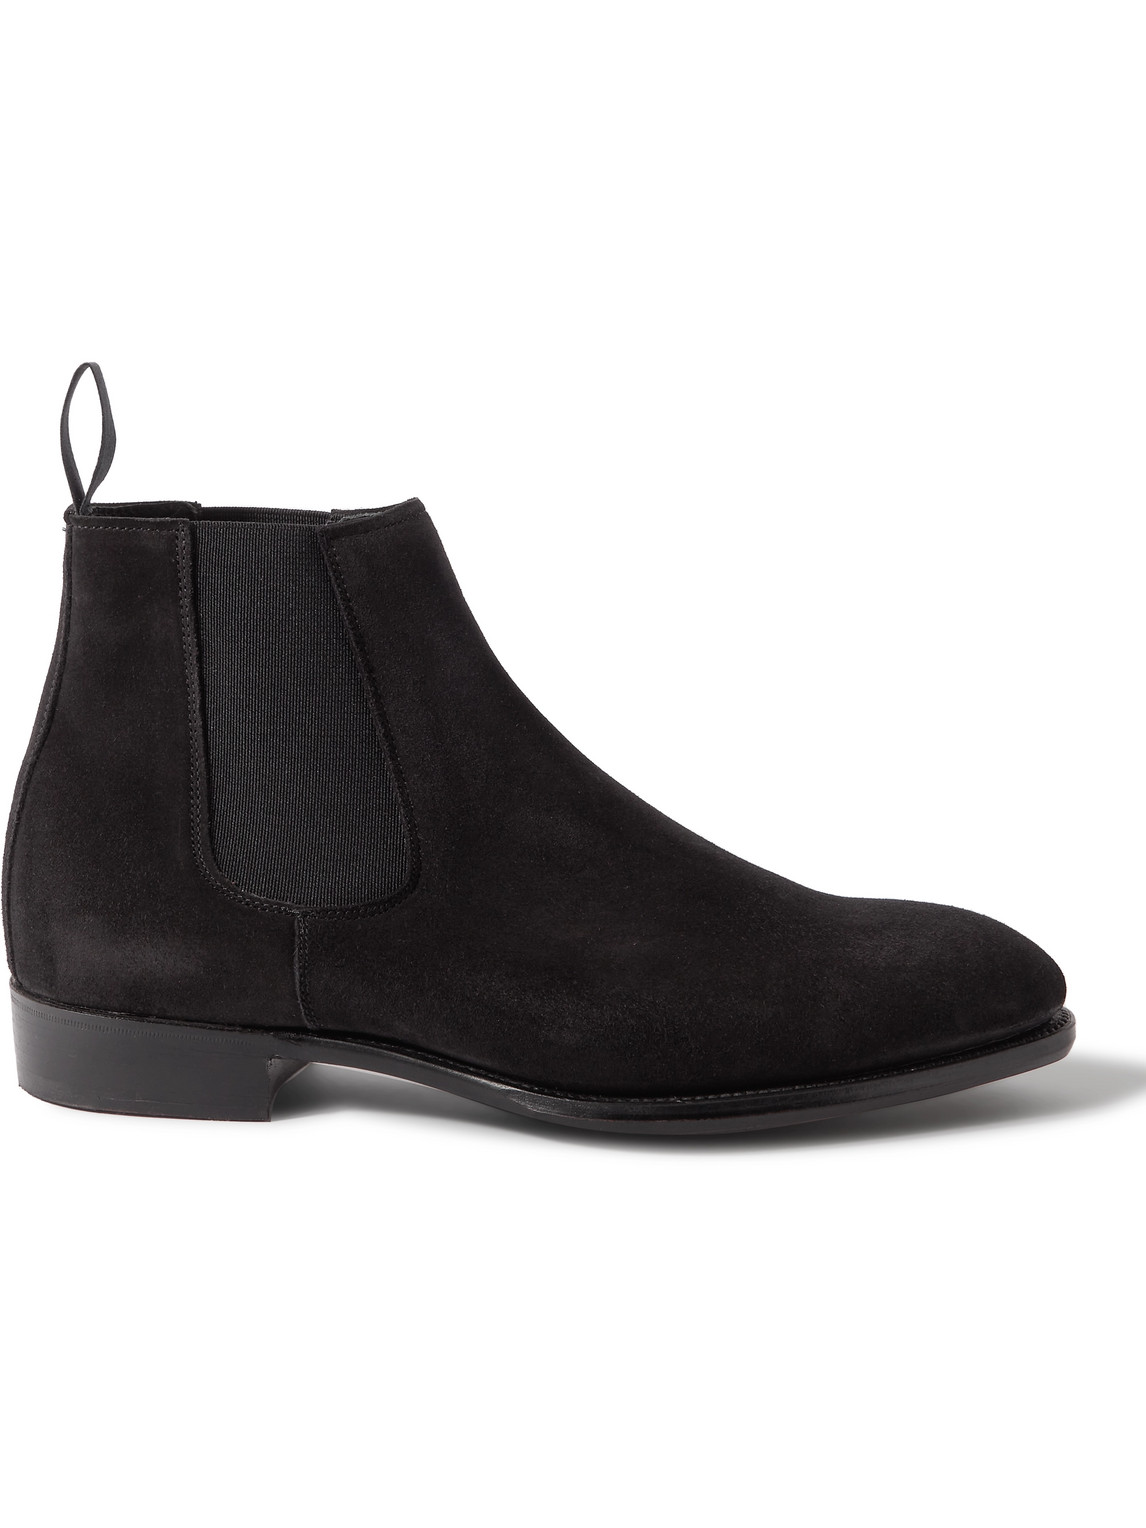 George Cleverley Jason Suede Chelsea Boots In Black